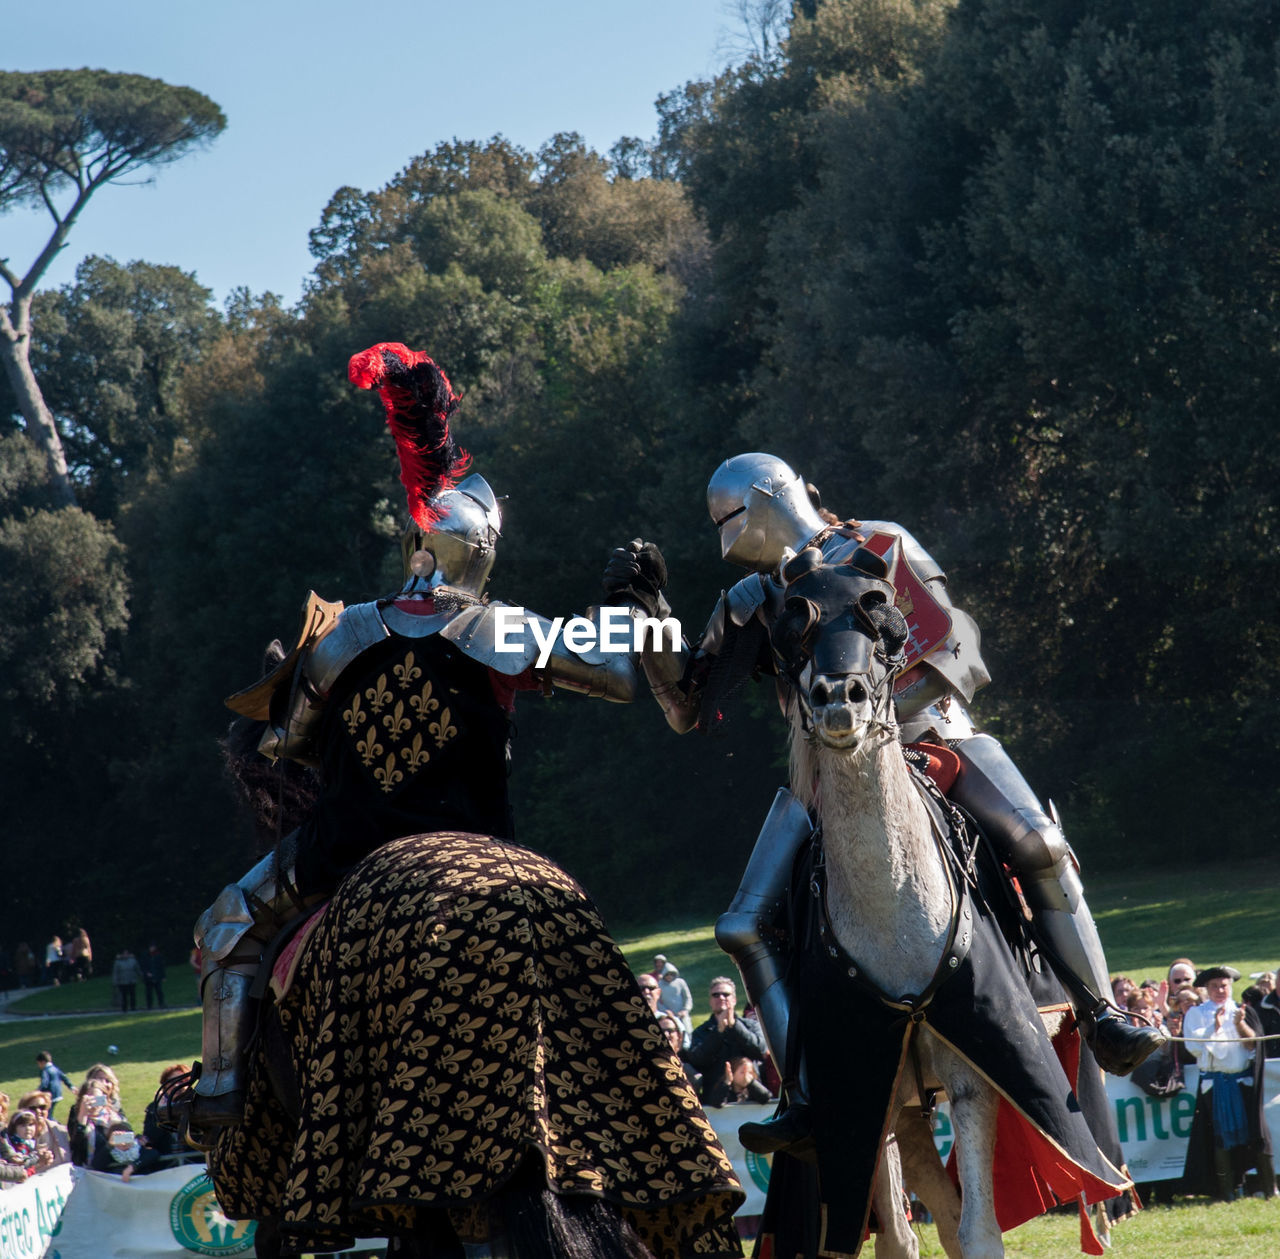 Men wearing armor costumes riding horses on field